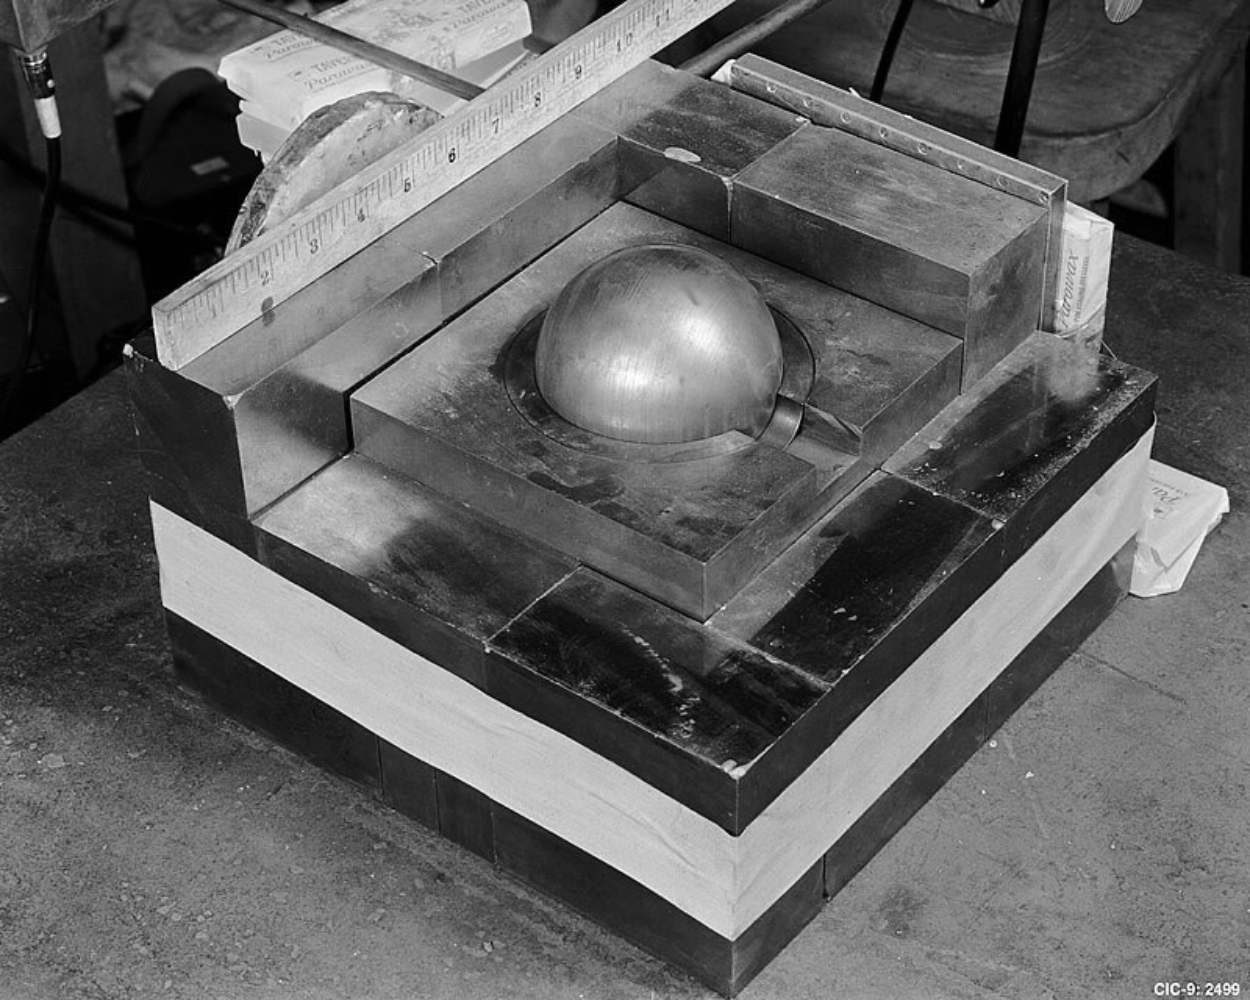 The experiments with Rufus were performed at the Los Alamos Laboratory.  Photo: Los Alamos National Laboratory/Flickr